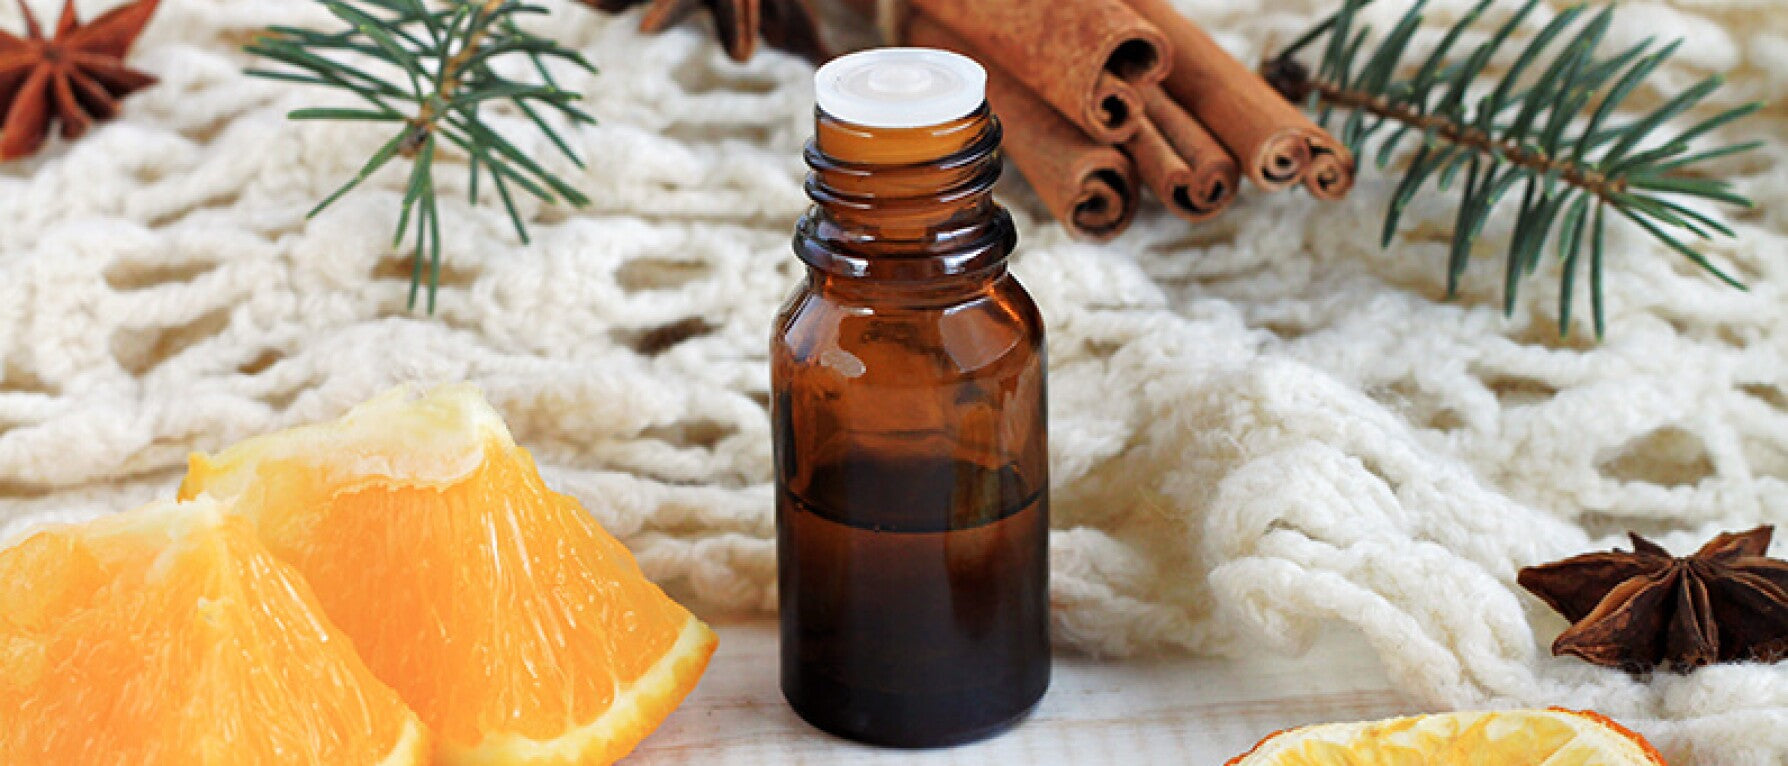 5 Must-Have Essential Oils for Winter